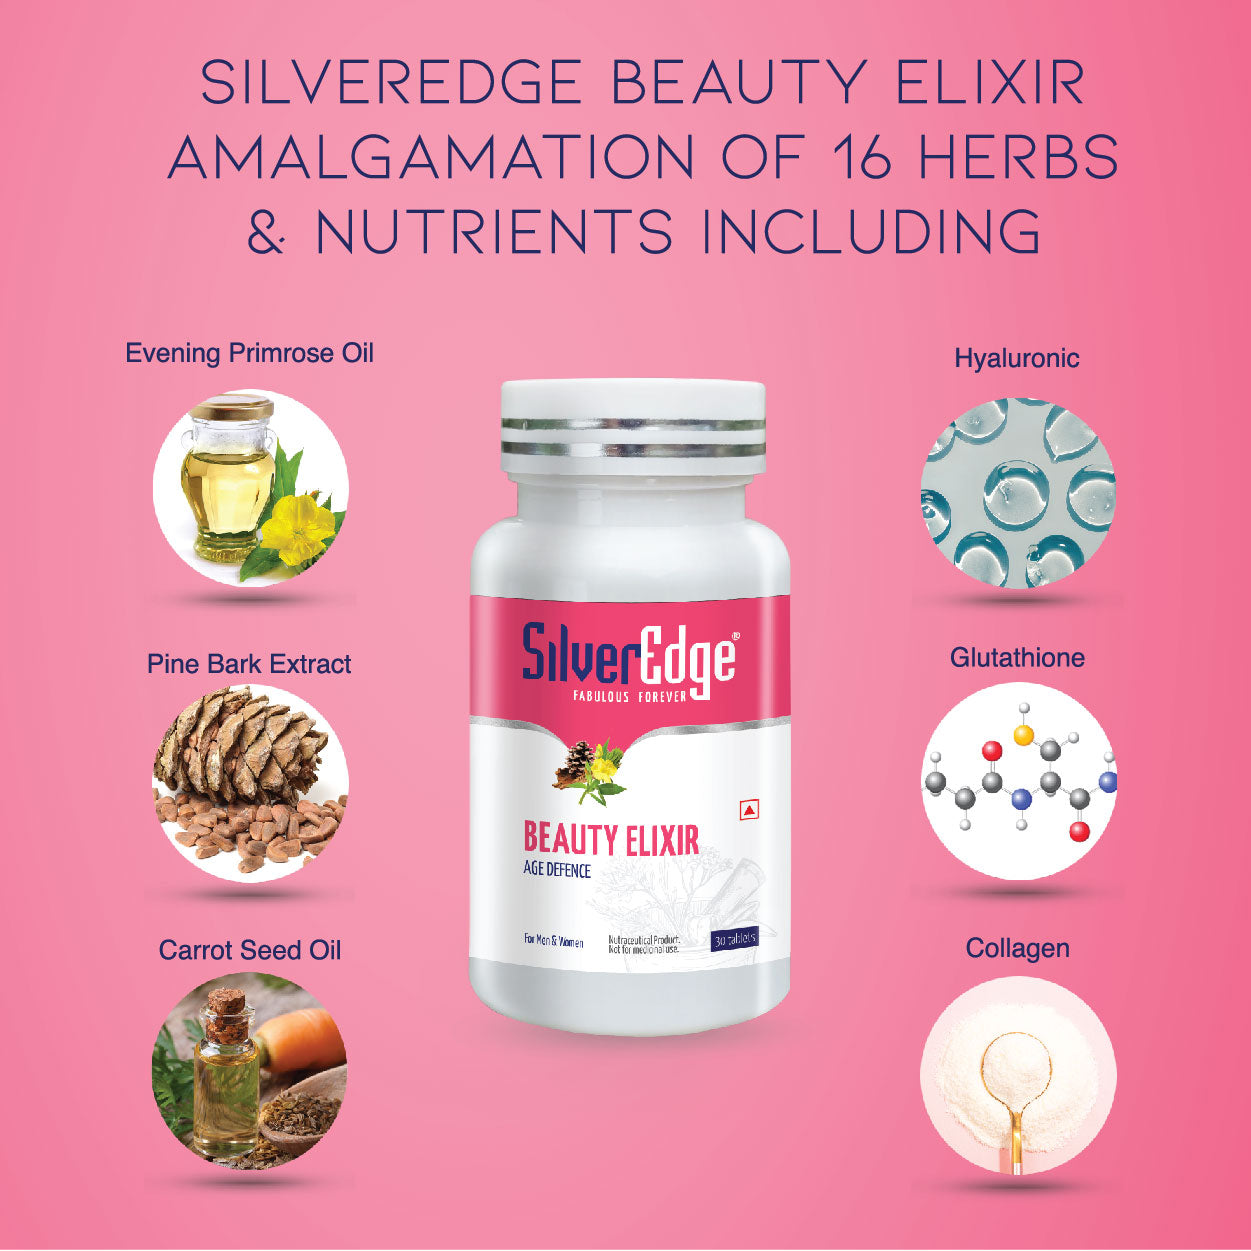 Buy Beauty Elixir Tablet in India, Beauty Elixir Tablet, Beauty Elixir, Natural beauty elixir tablets, SilverEdge, Age Defence, anti-pigmentation, Best anti-pigmentation